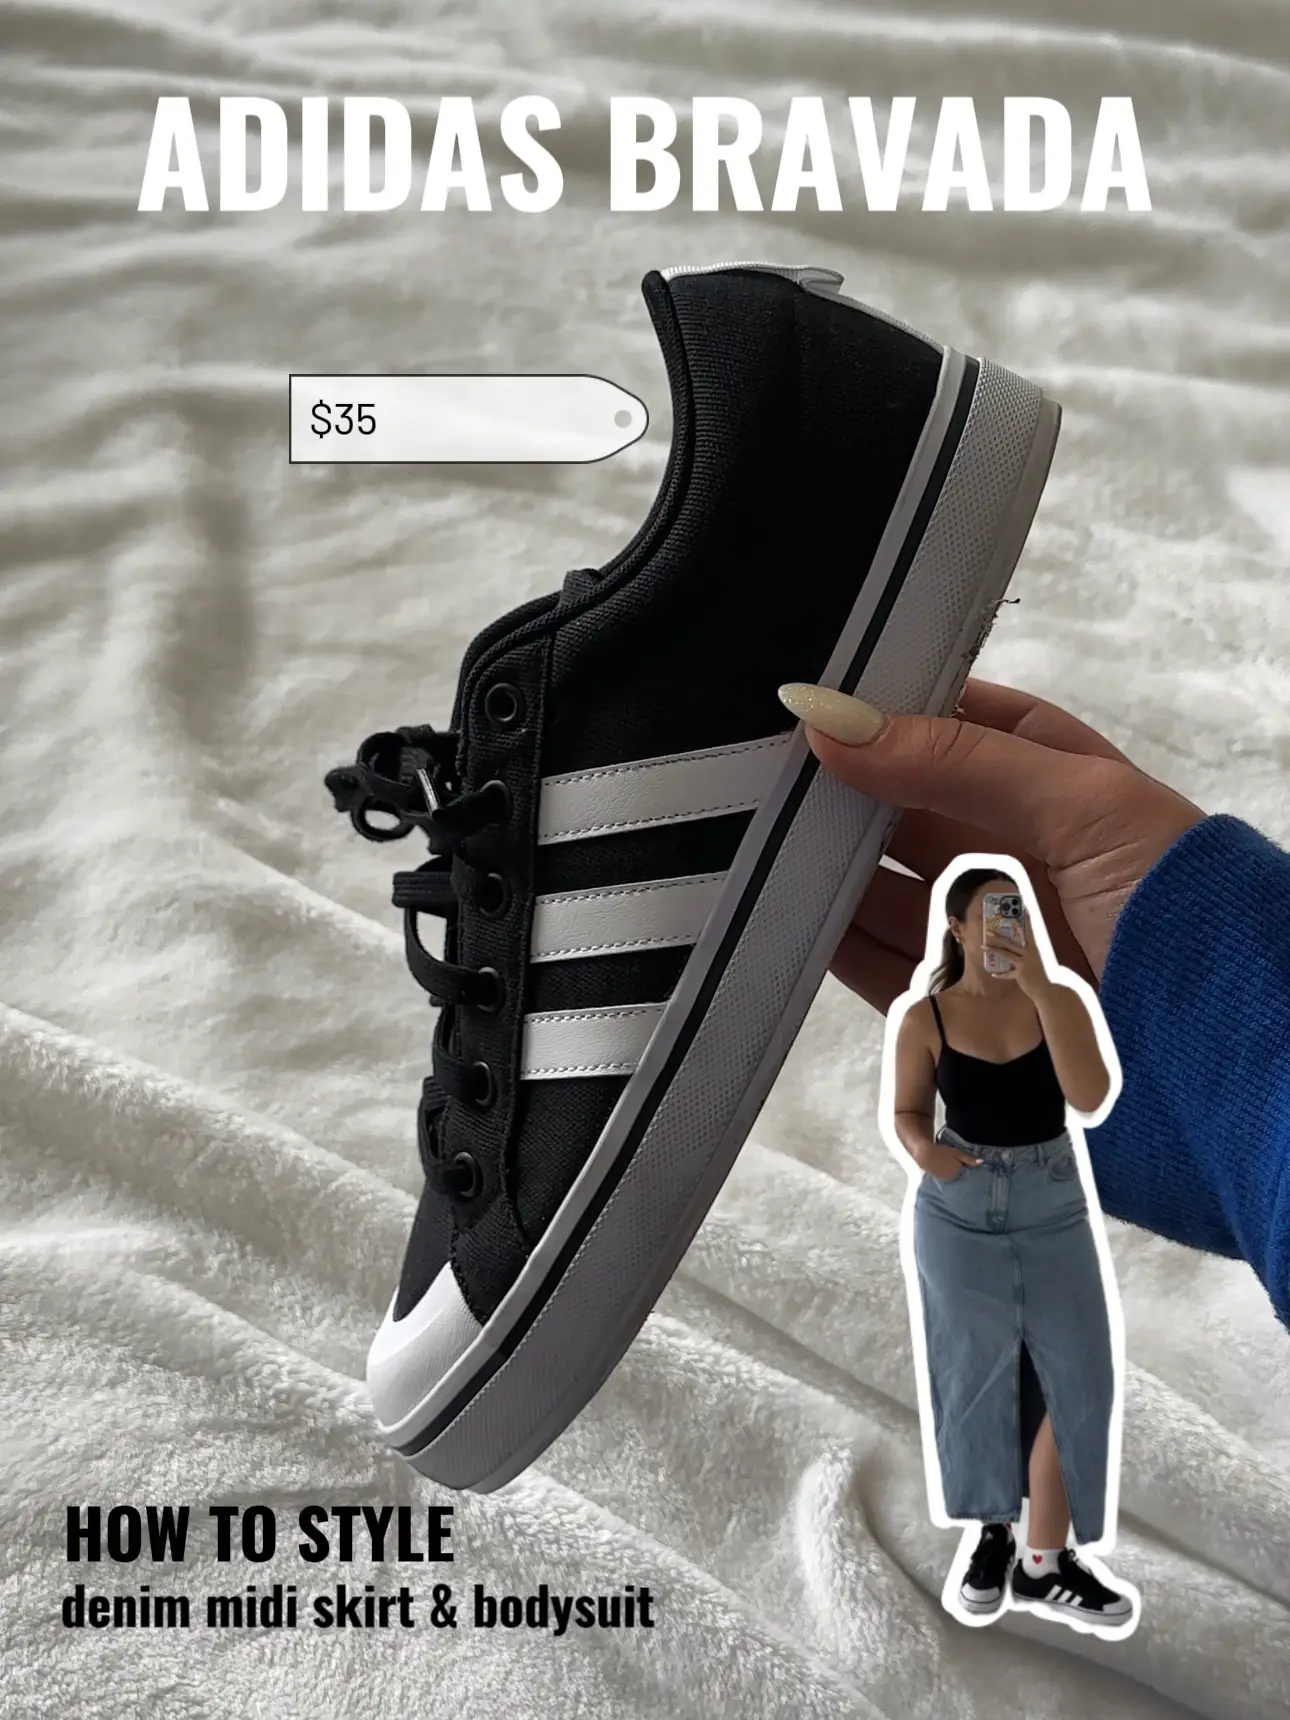 ADIDAS SNEAKER MUST HAVES., Gallery posted by Valerie Escobar